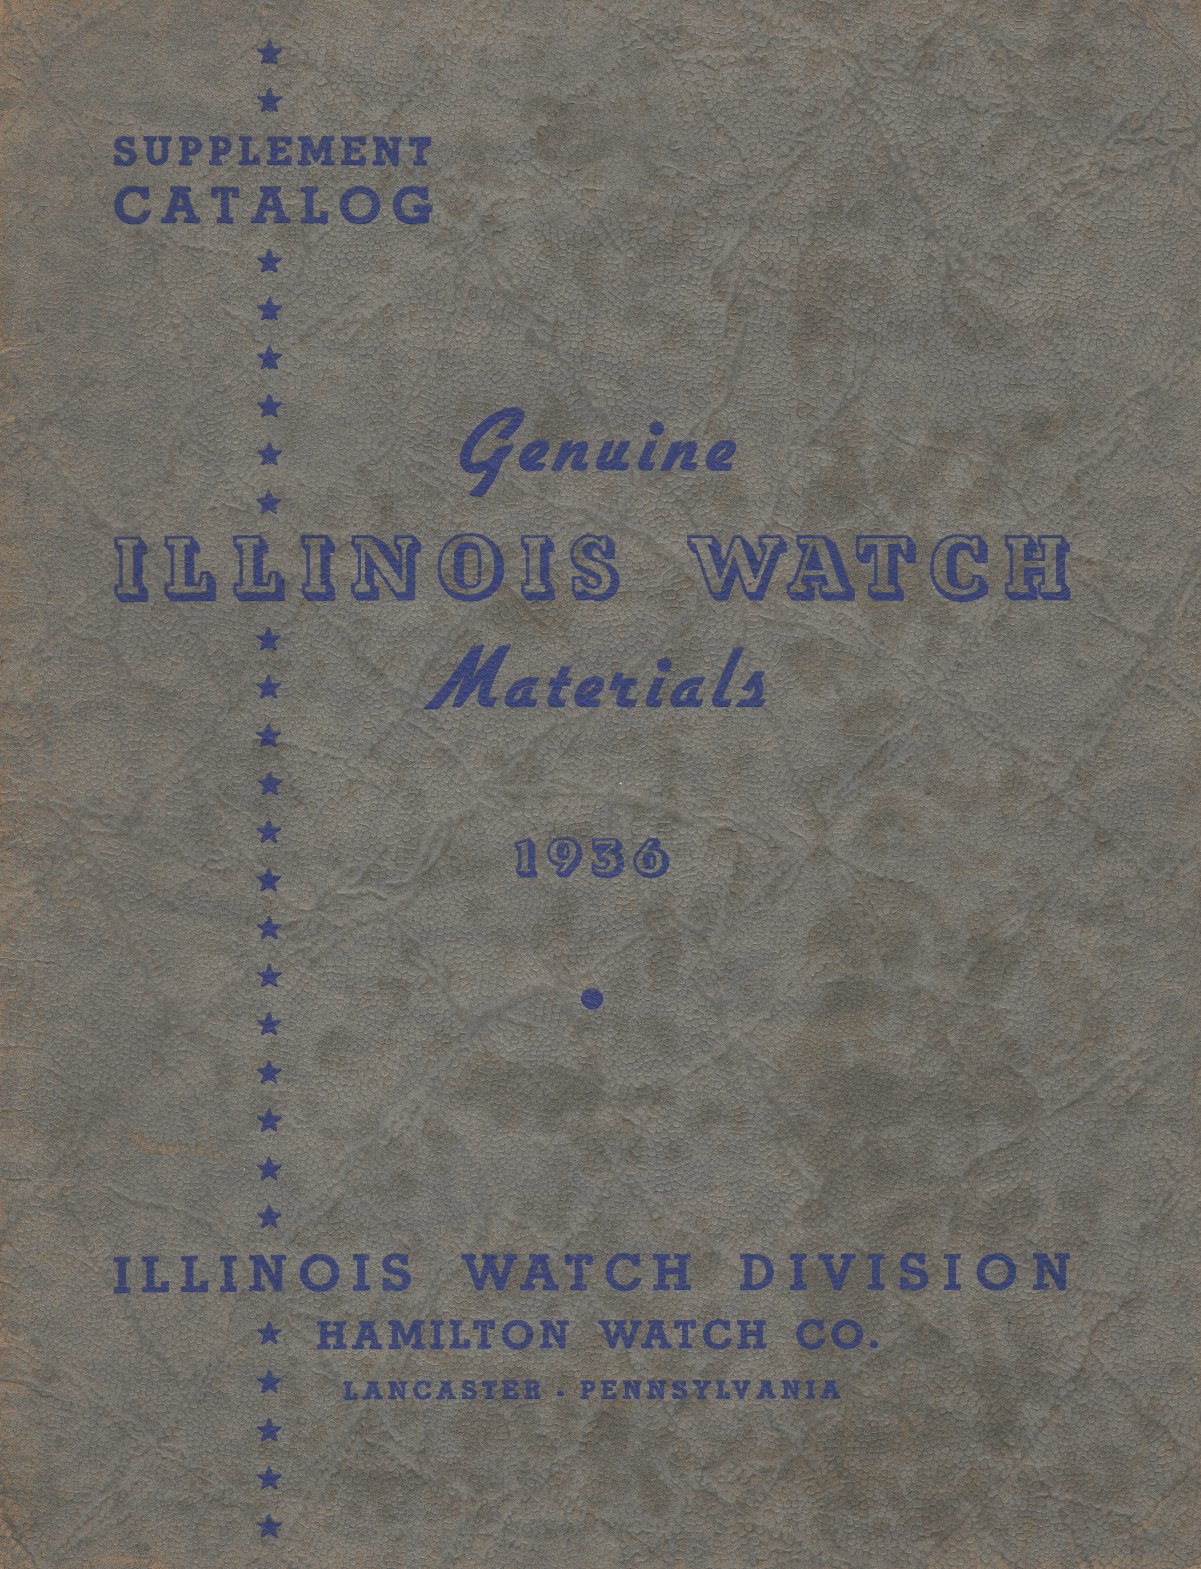 Genuine Illinois Watch Materials: Supplement Catalog (1936) Cover Image